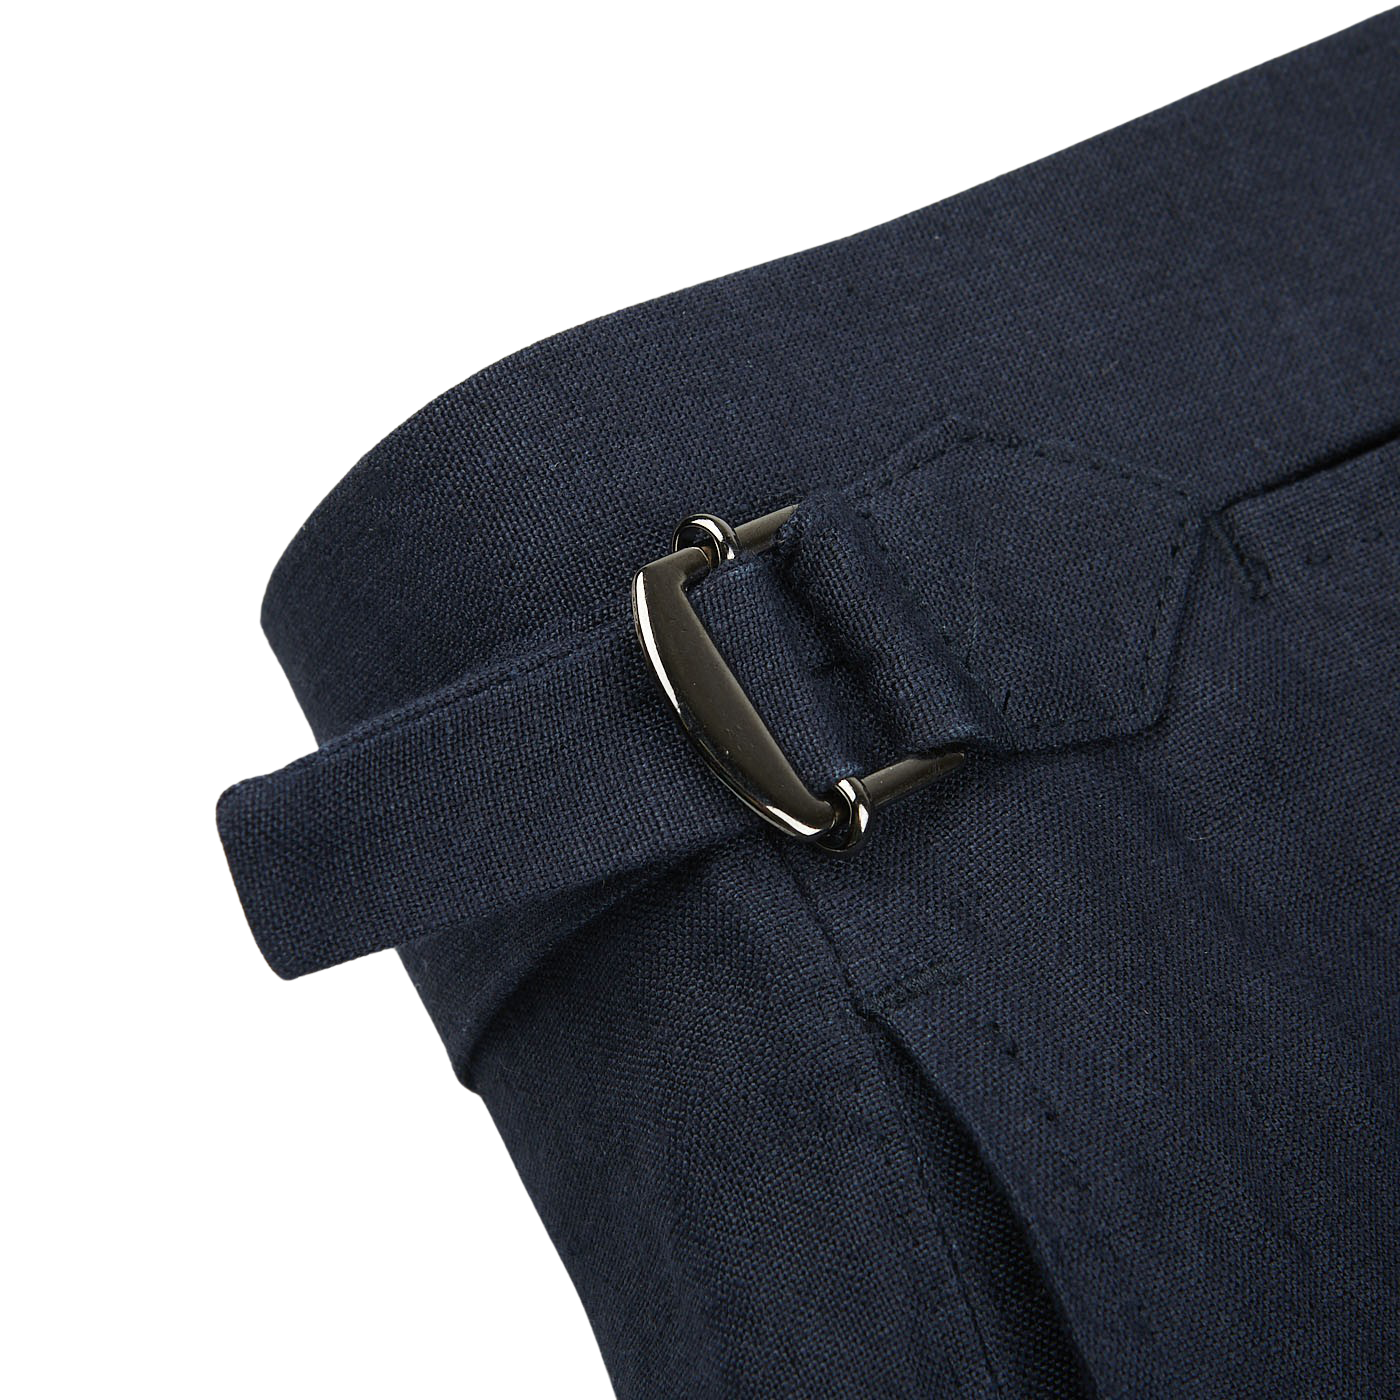 Belt Loops Or Side Adjusters? | Made To Measure Suits - YouTube